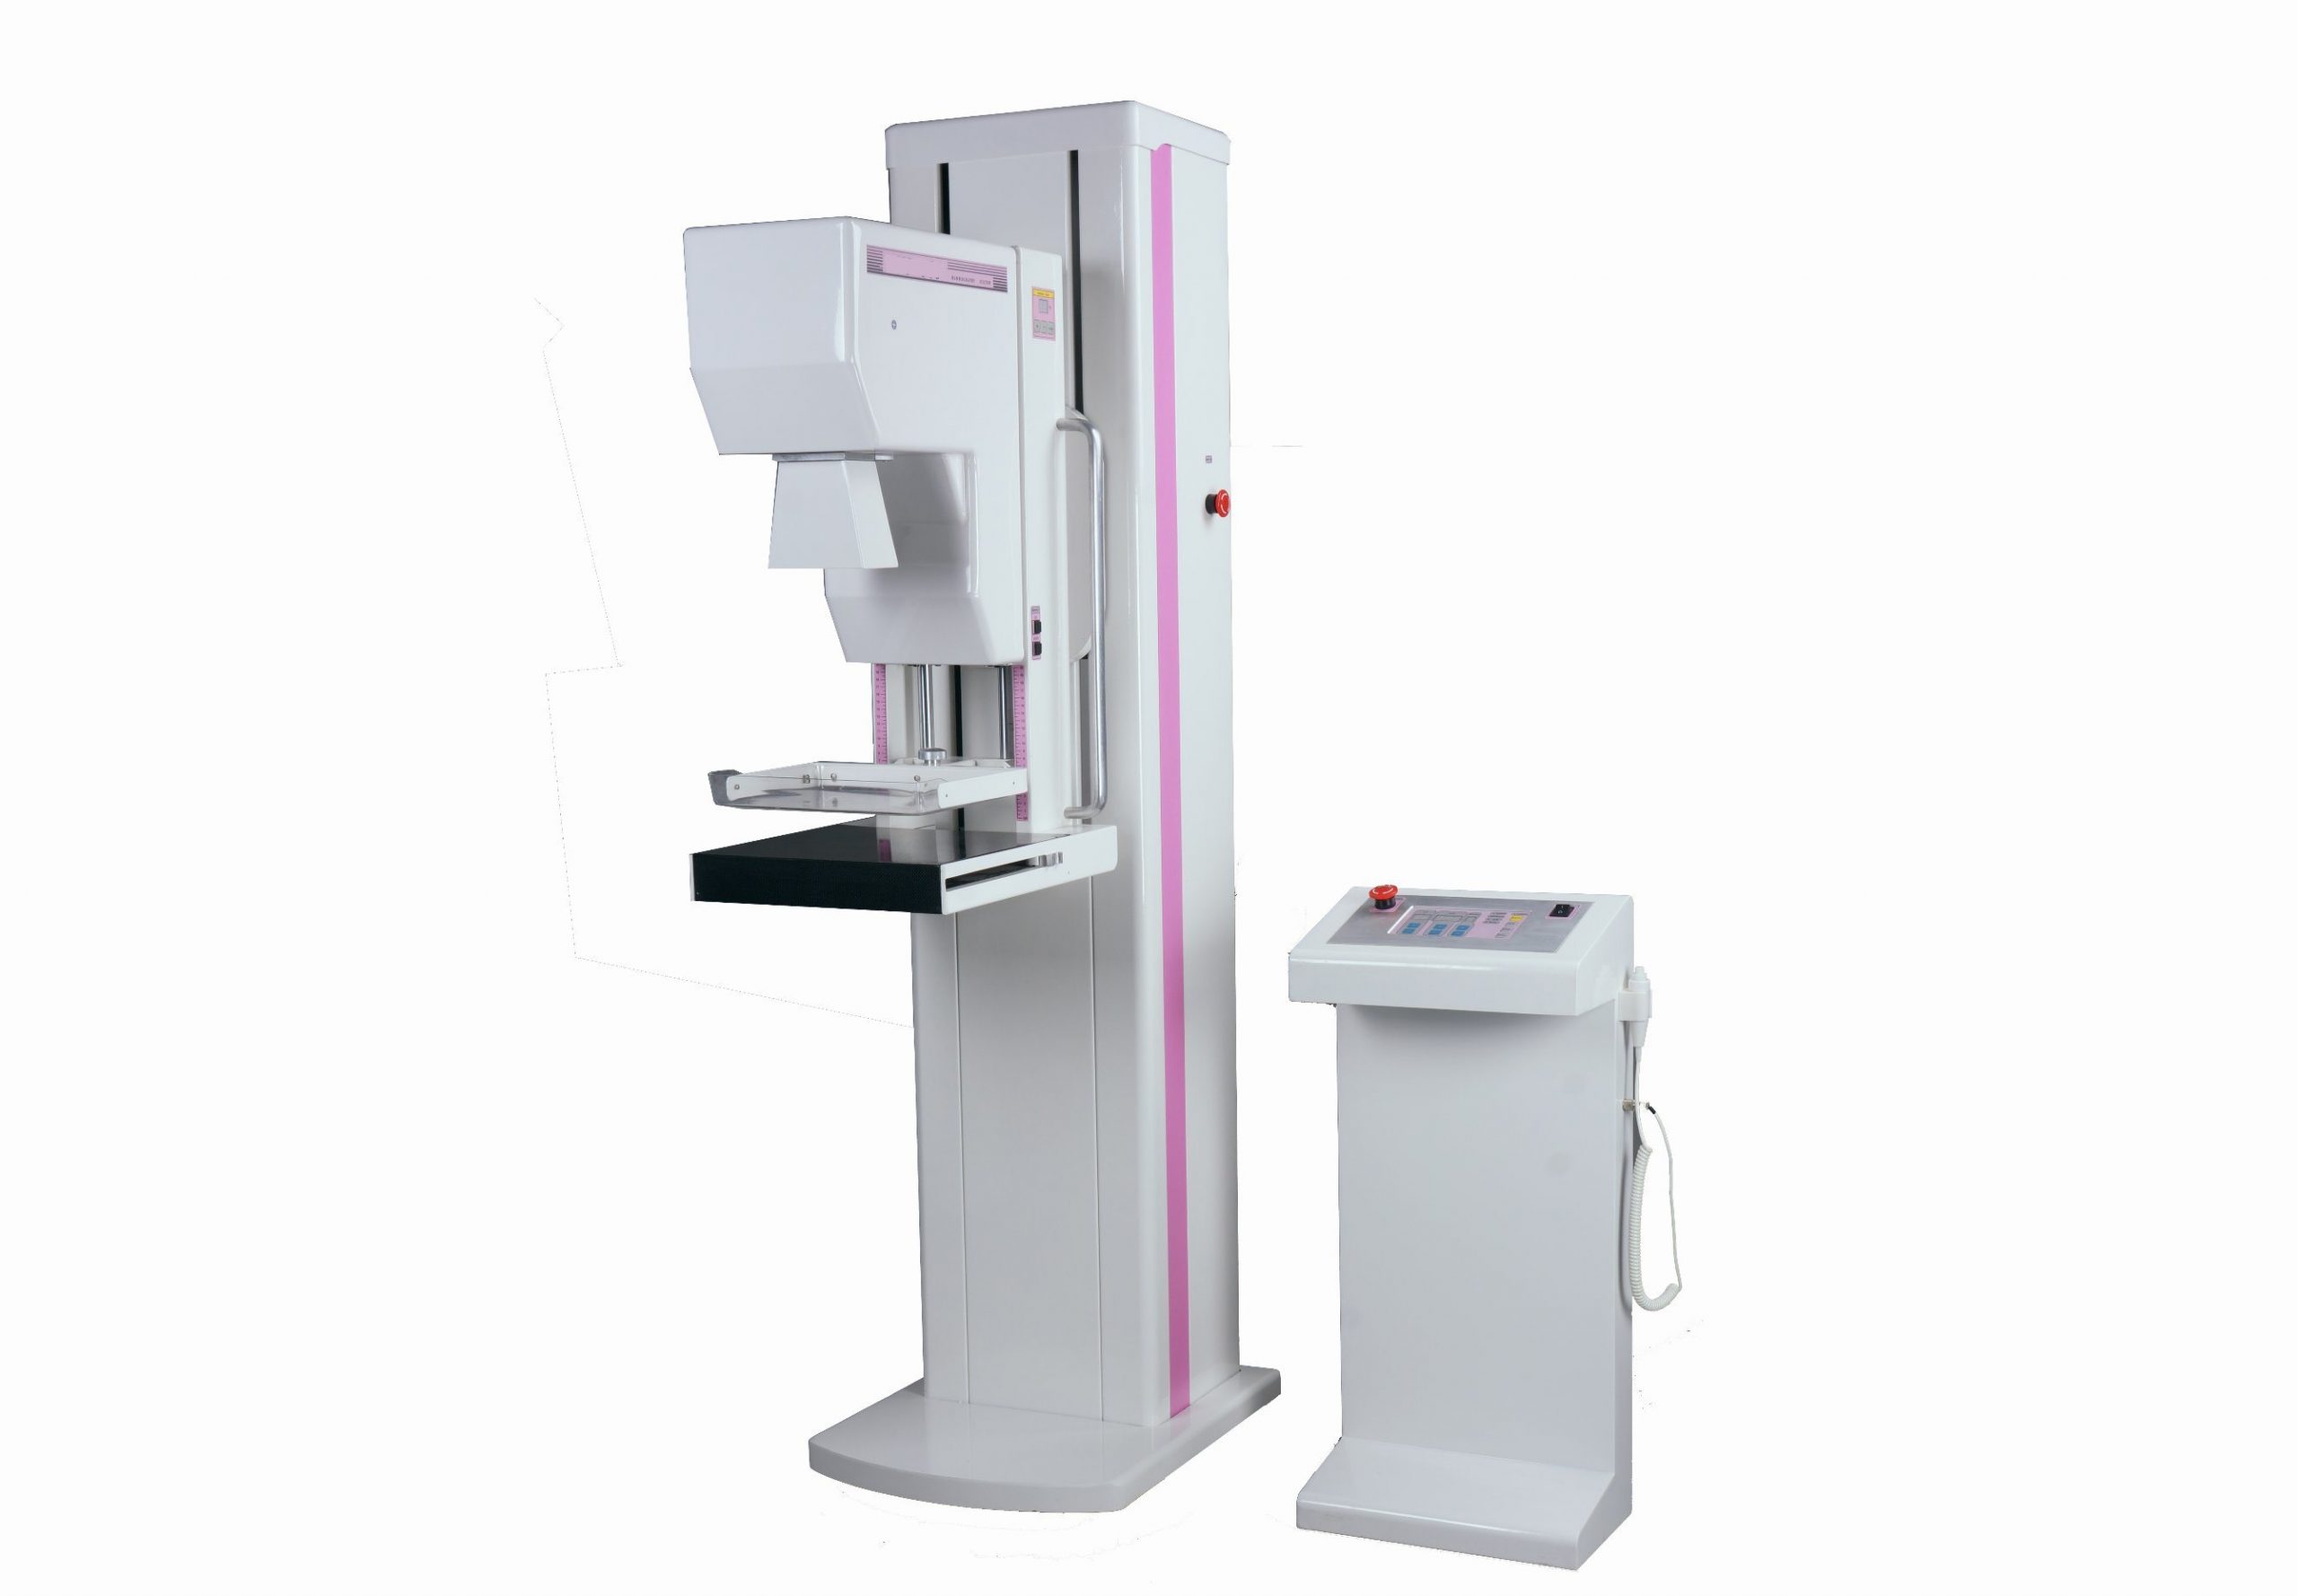 Mammography System with Manual Control